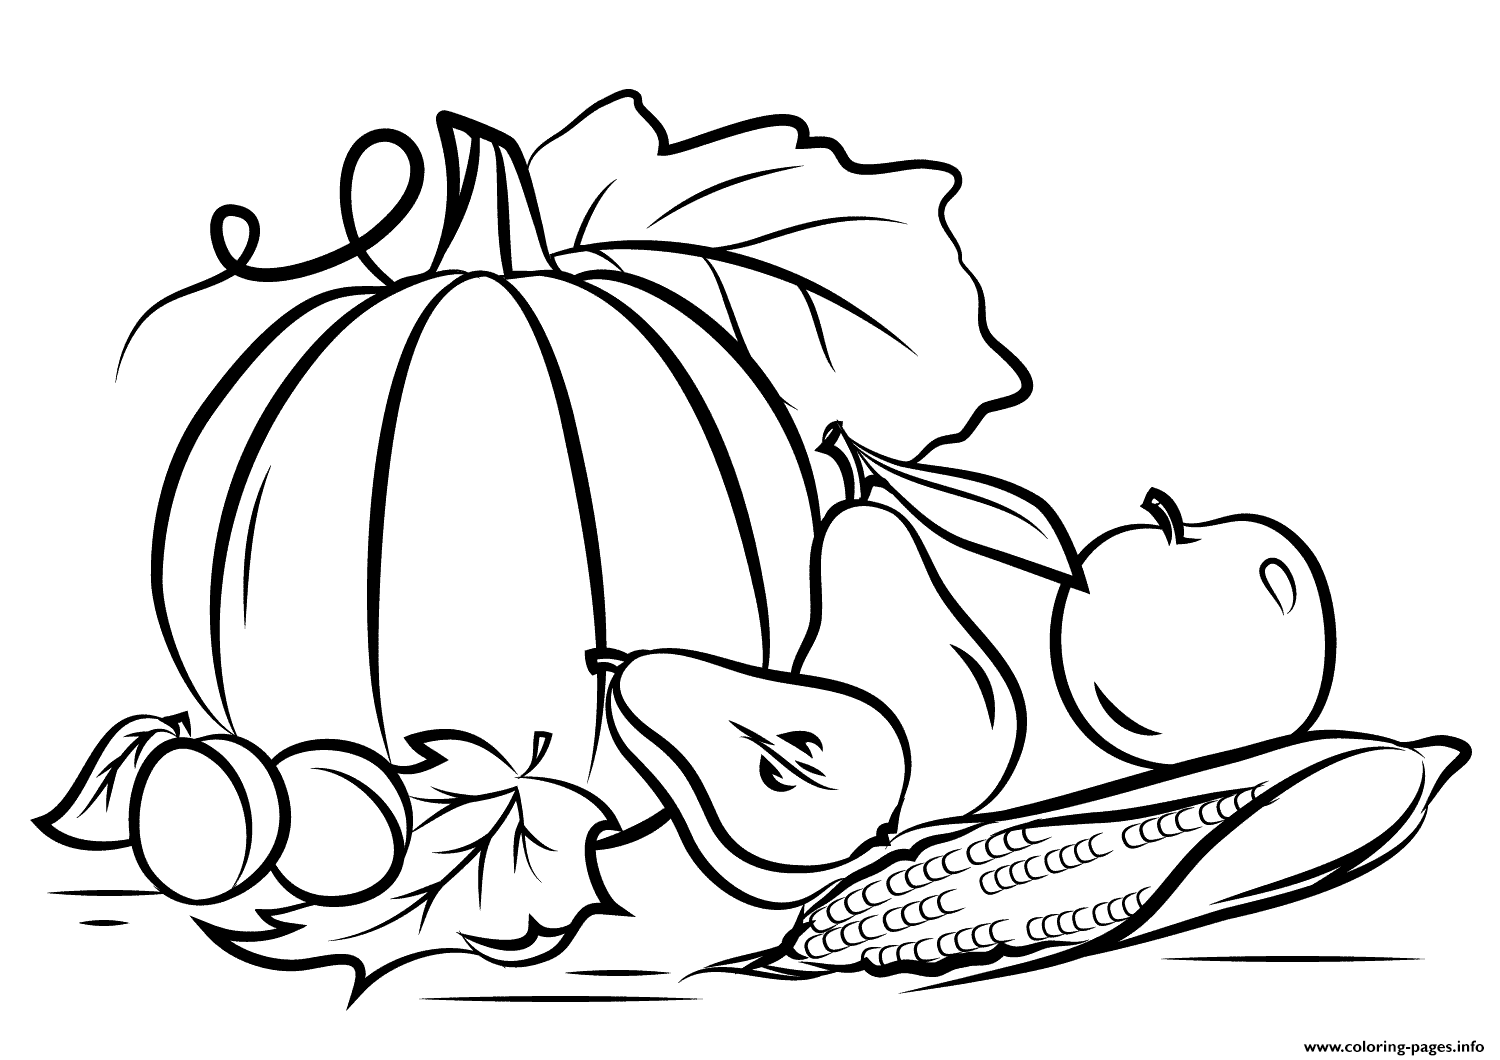 Top Coloring Pages Free Autumn Coloring Pages Printables Autumn